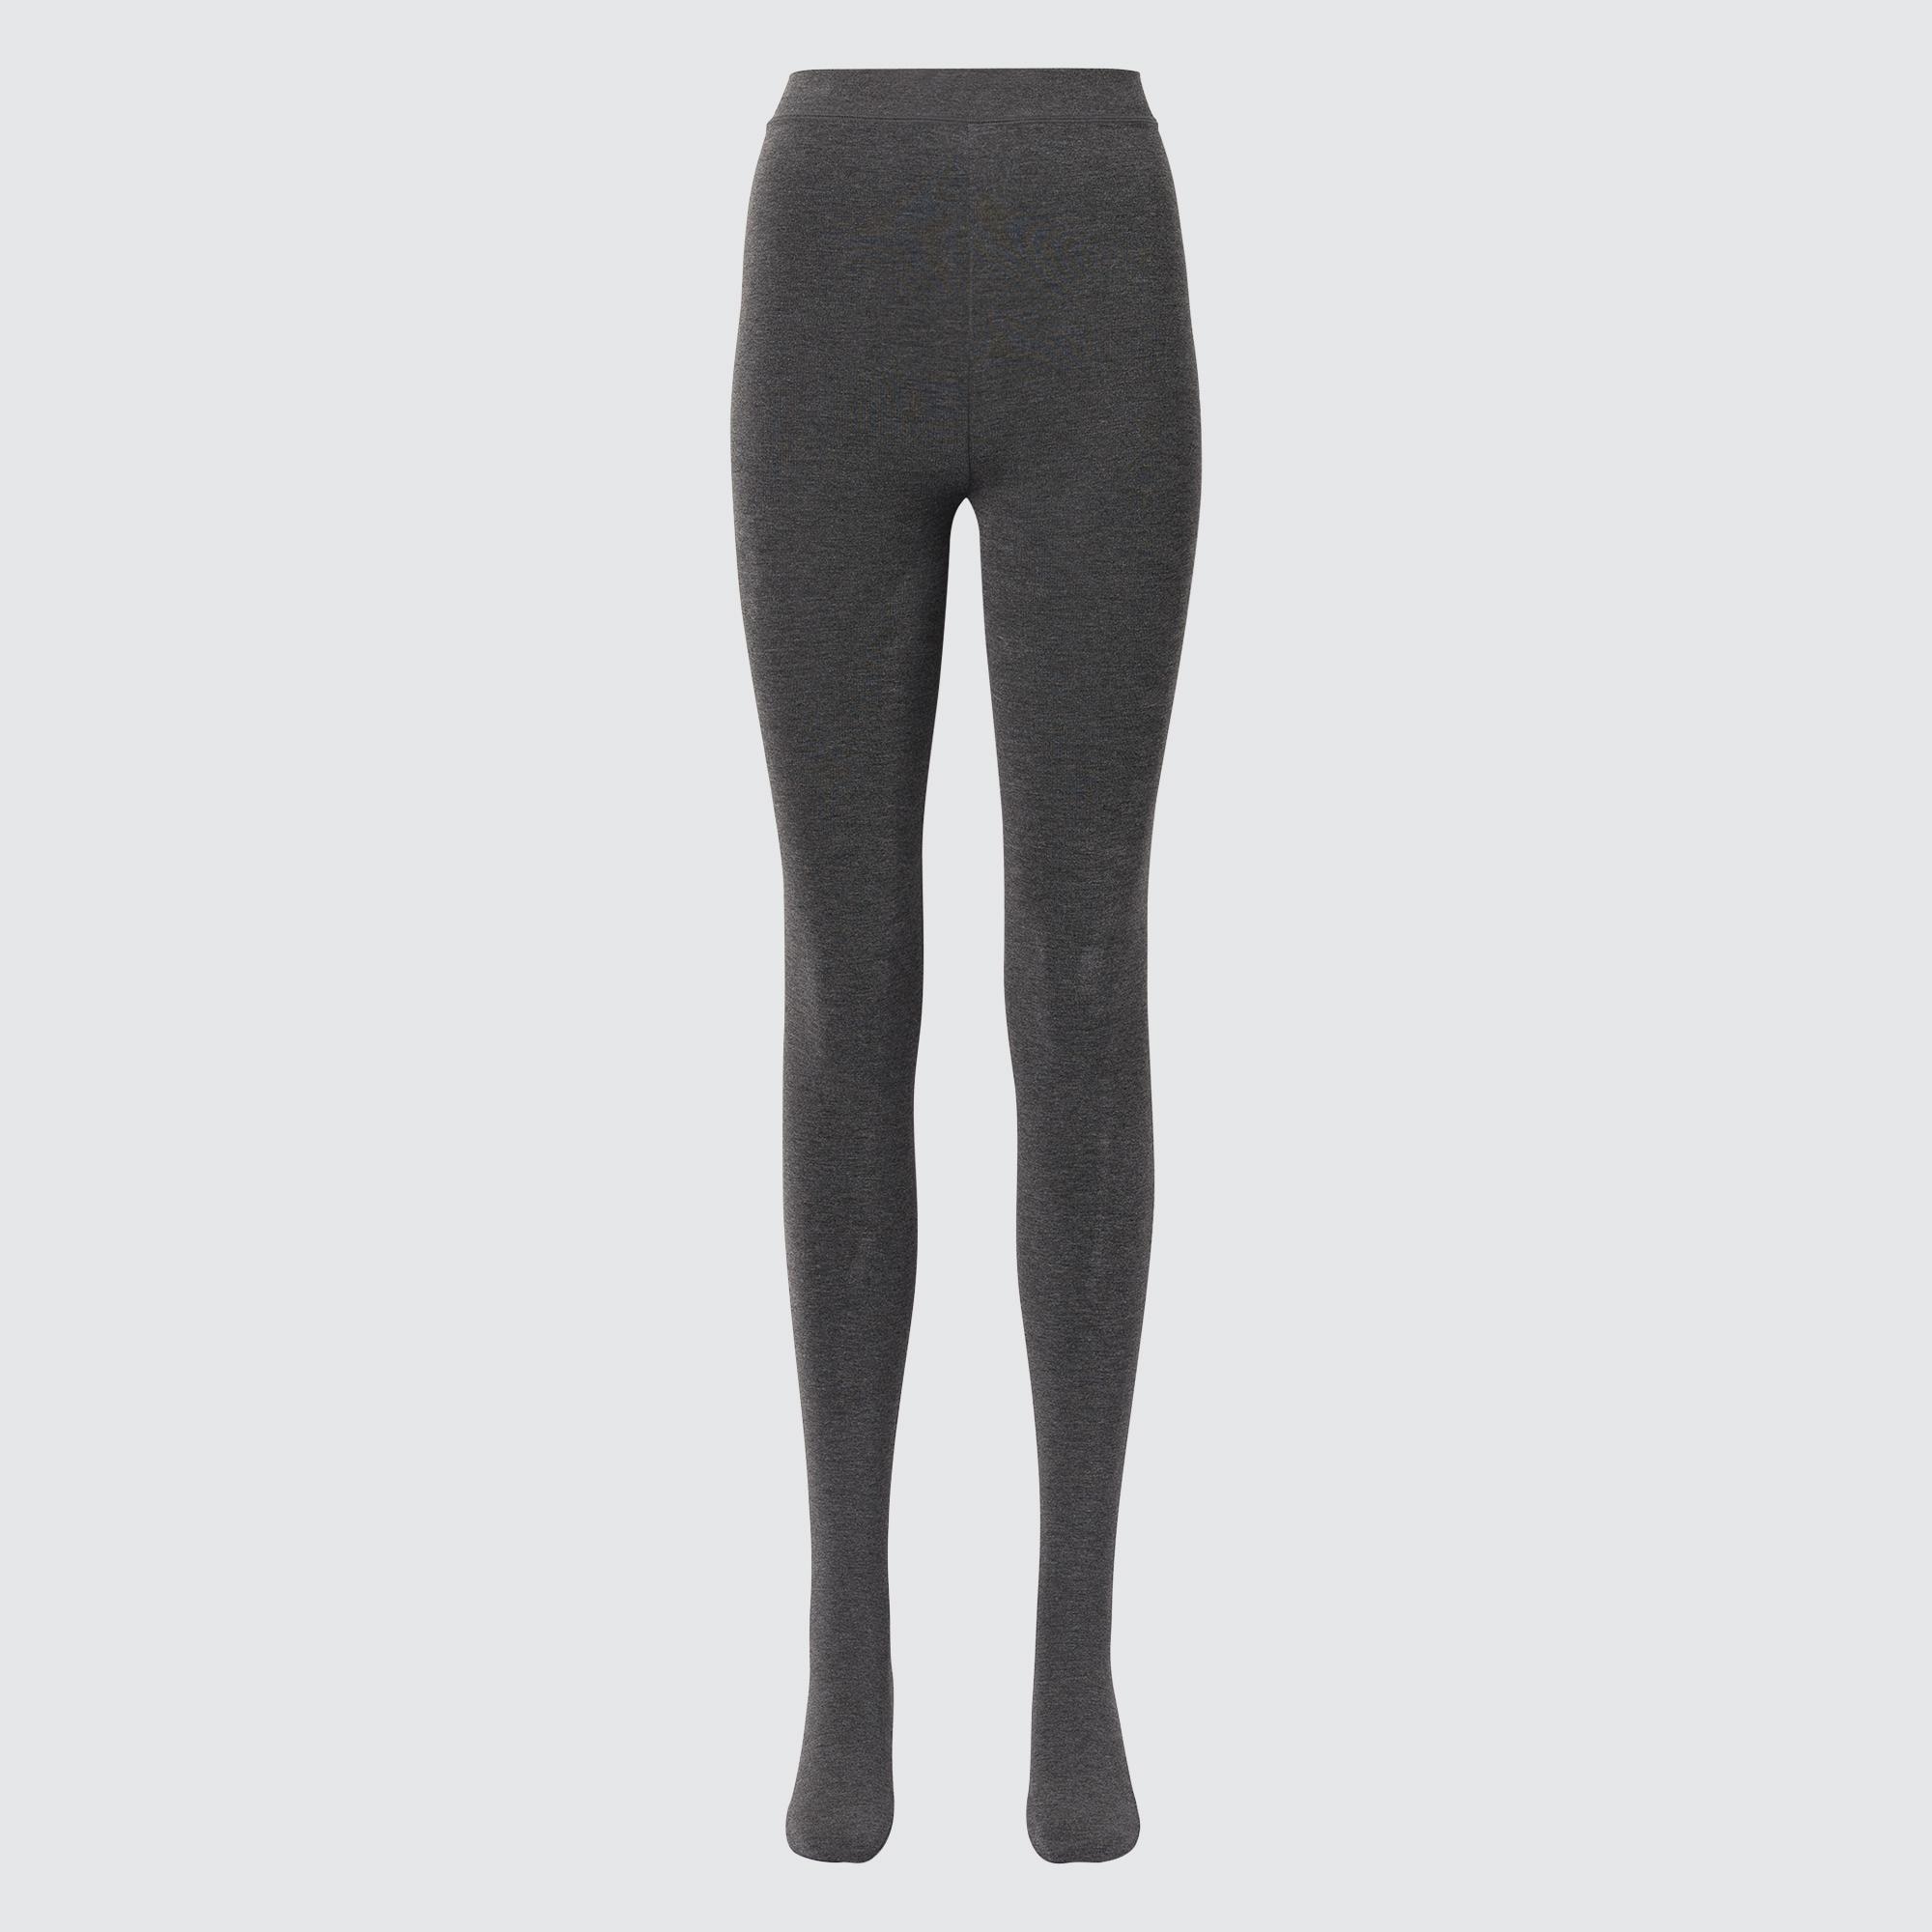 Stay Warm and Stylish with UNIQLO Women's Glitter Tights